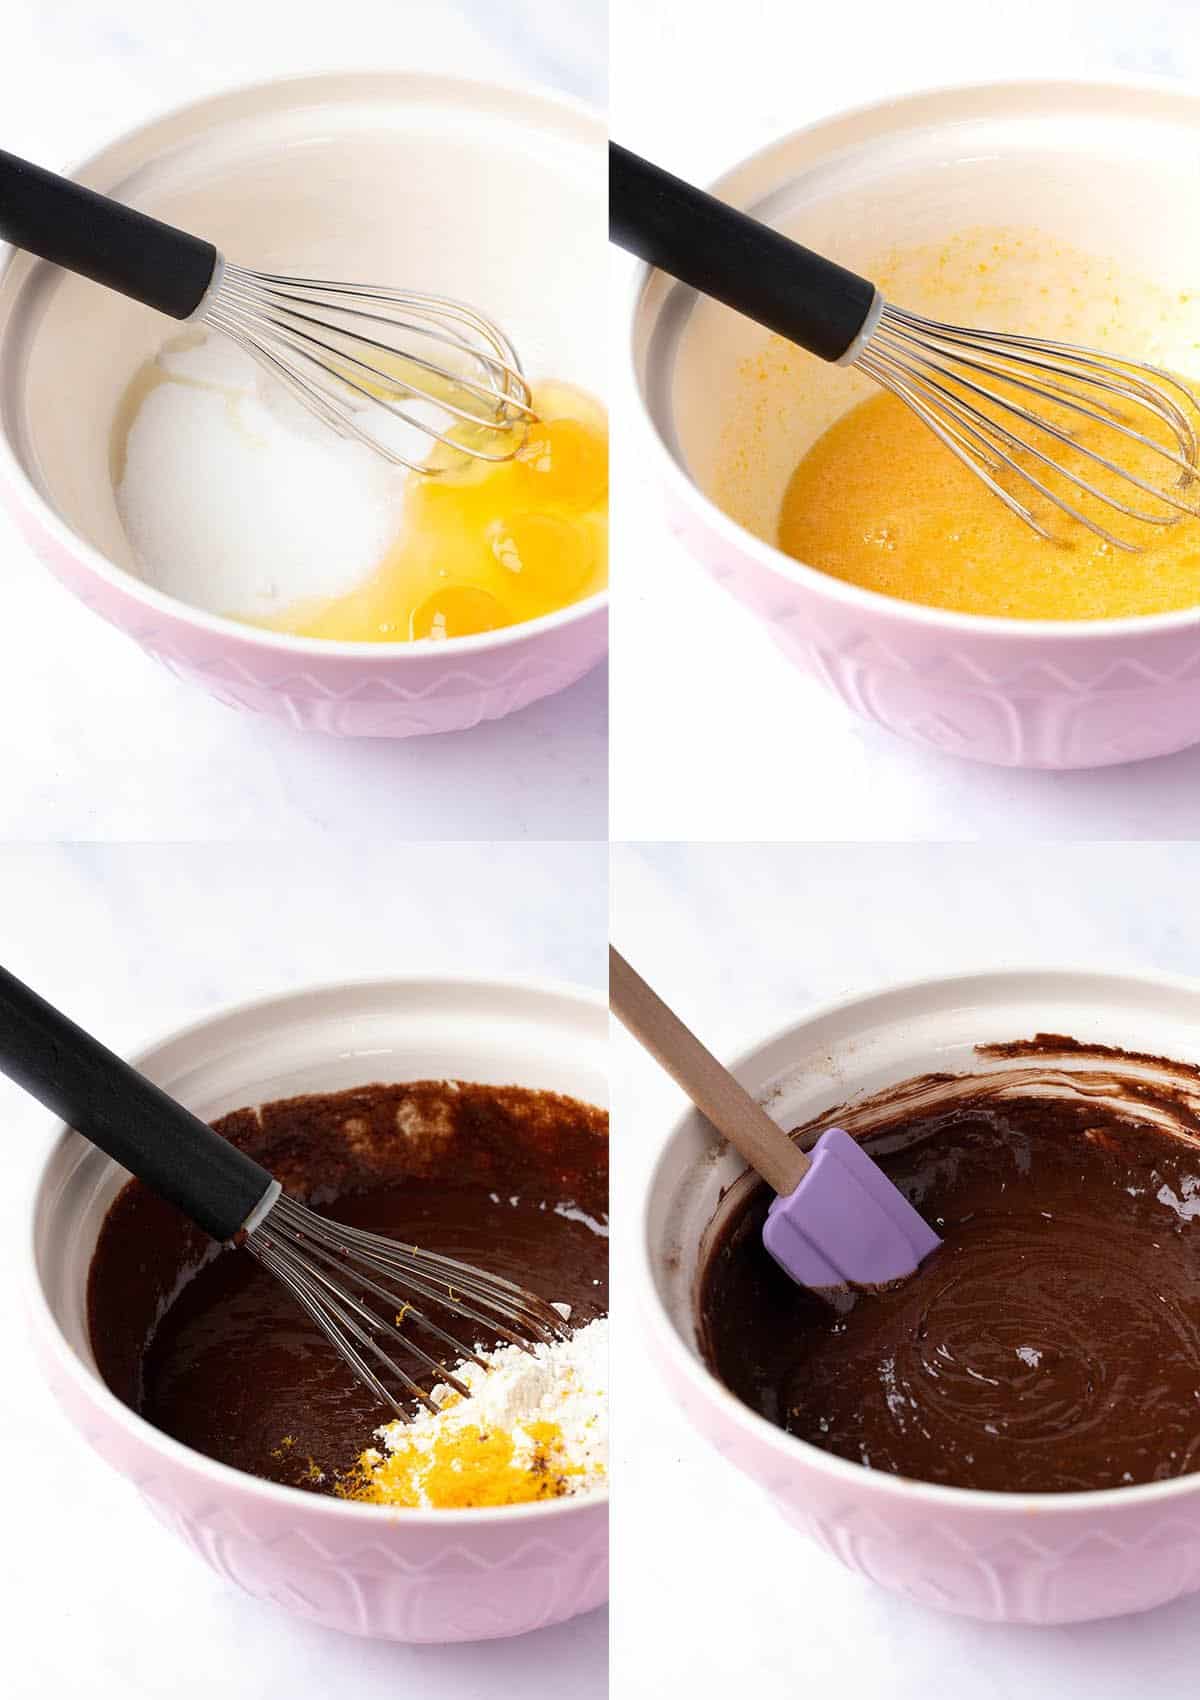 Step by step photos showing how to make Chocolate Orange Brownies from scratch.